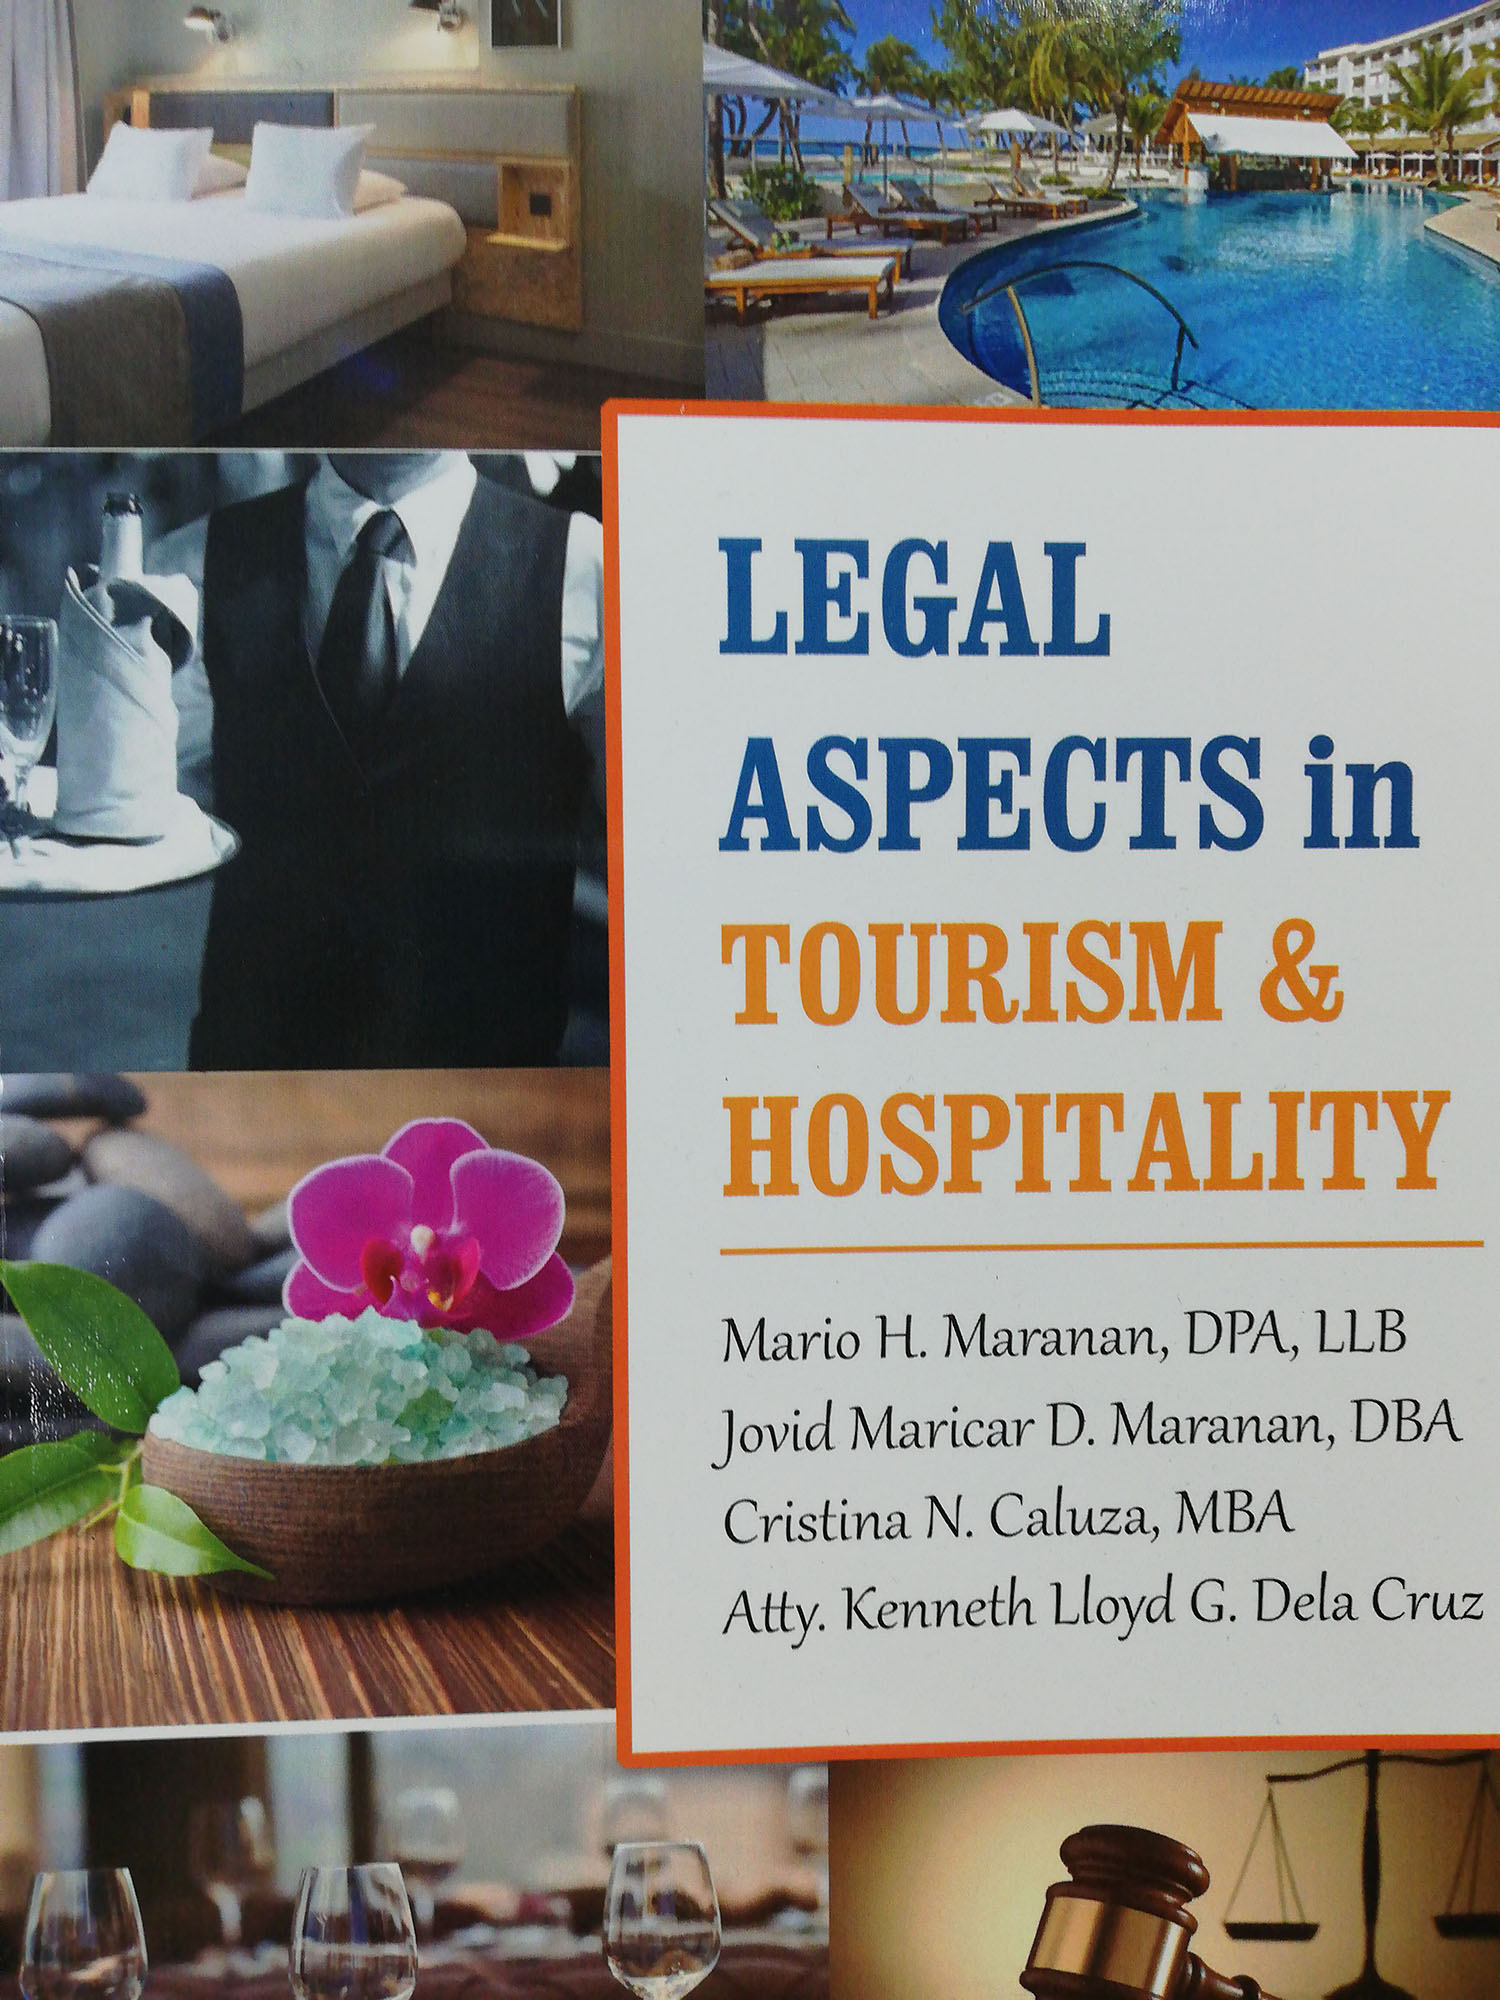 case study related to legal aspects in tourism and hospitality